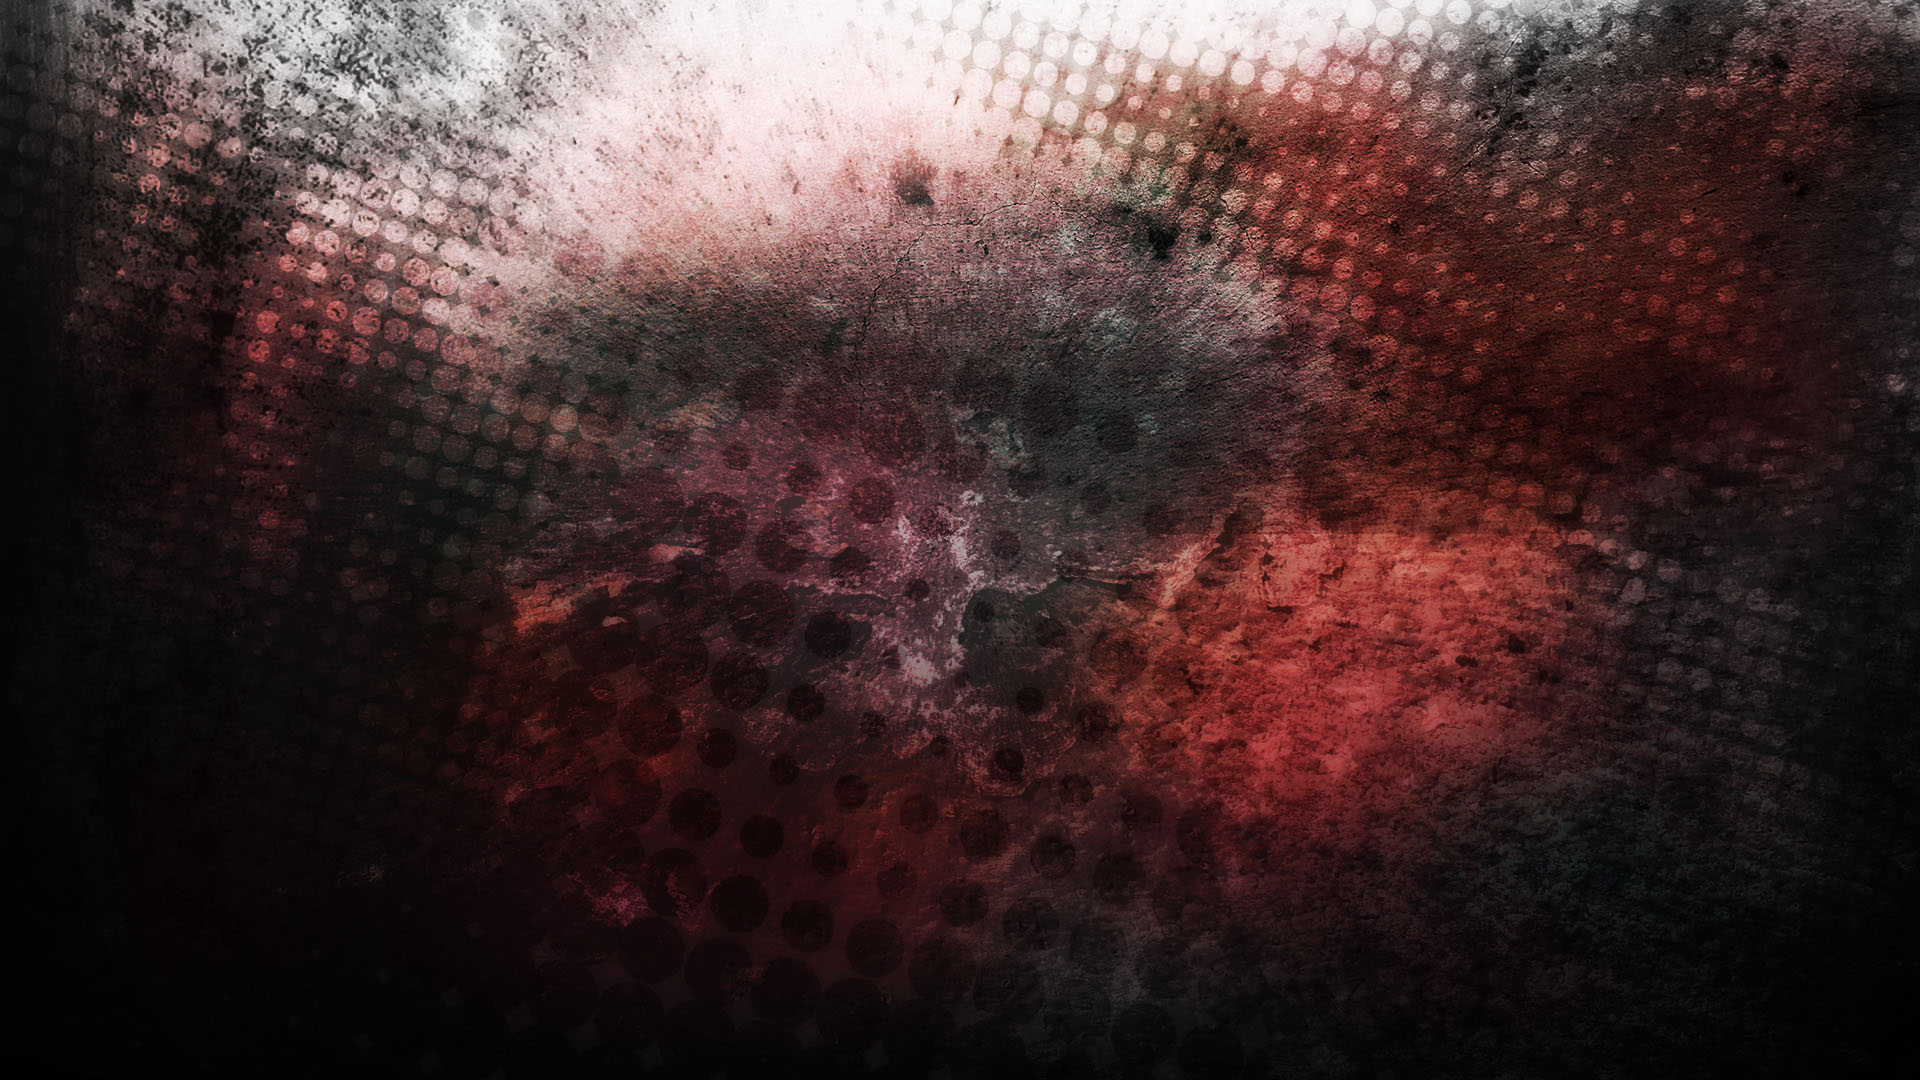 Crazy Abstract Grunge Wallpaper (Full HD) by TheIcemanPL on DeviantArt